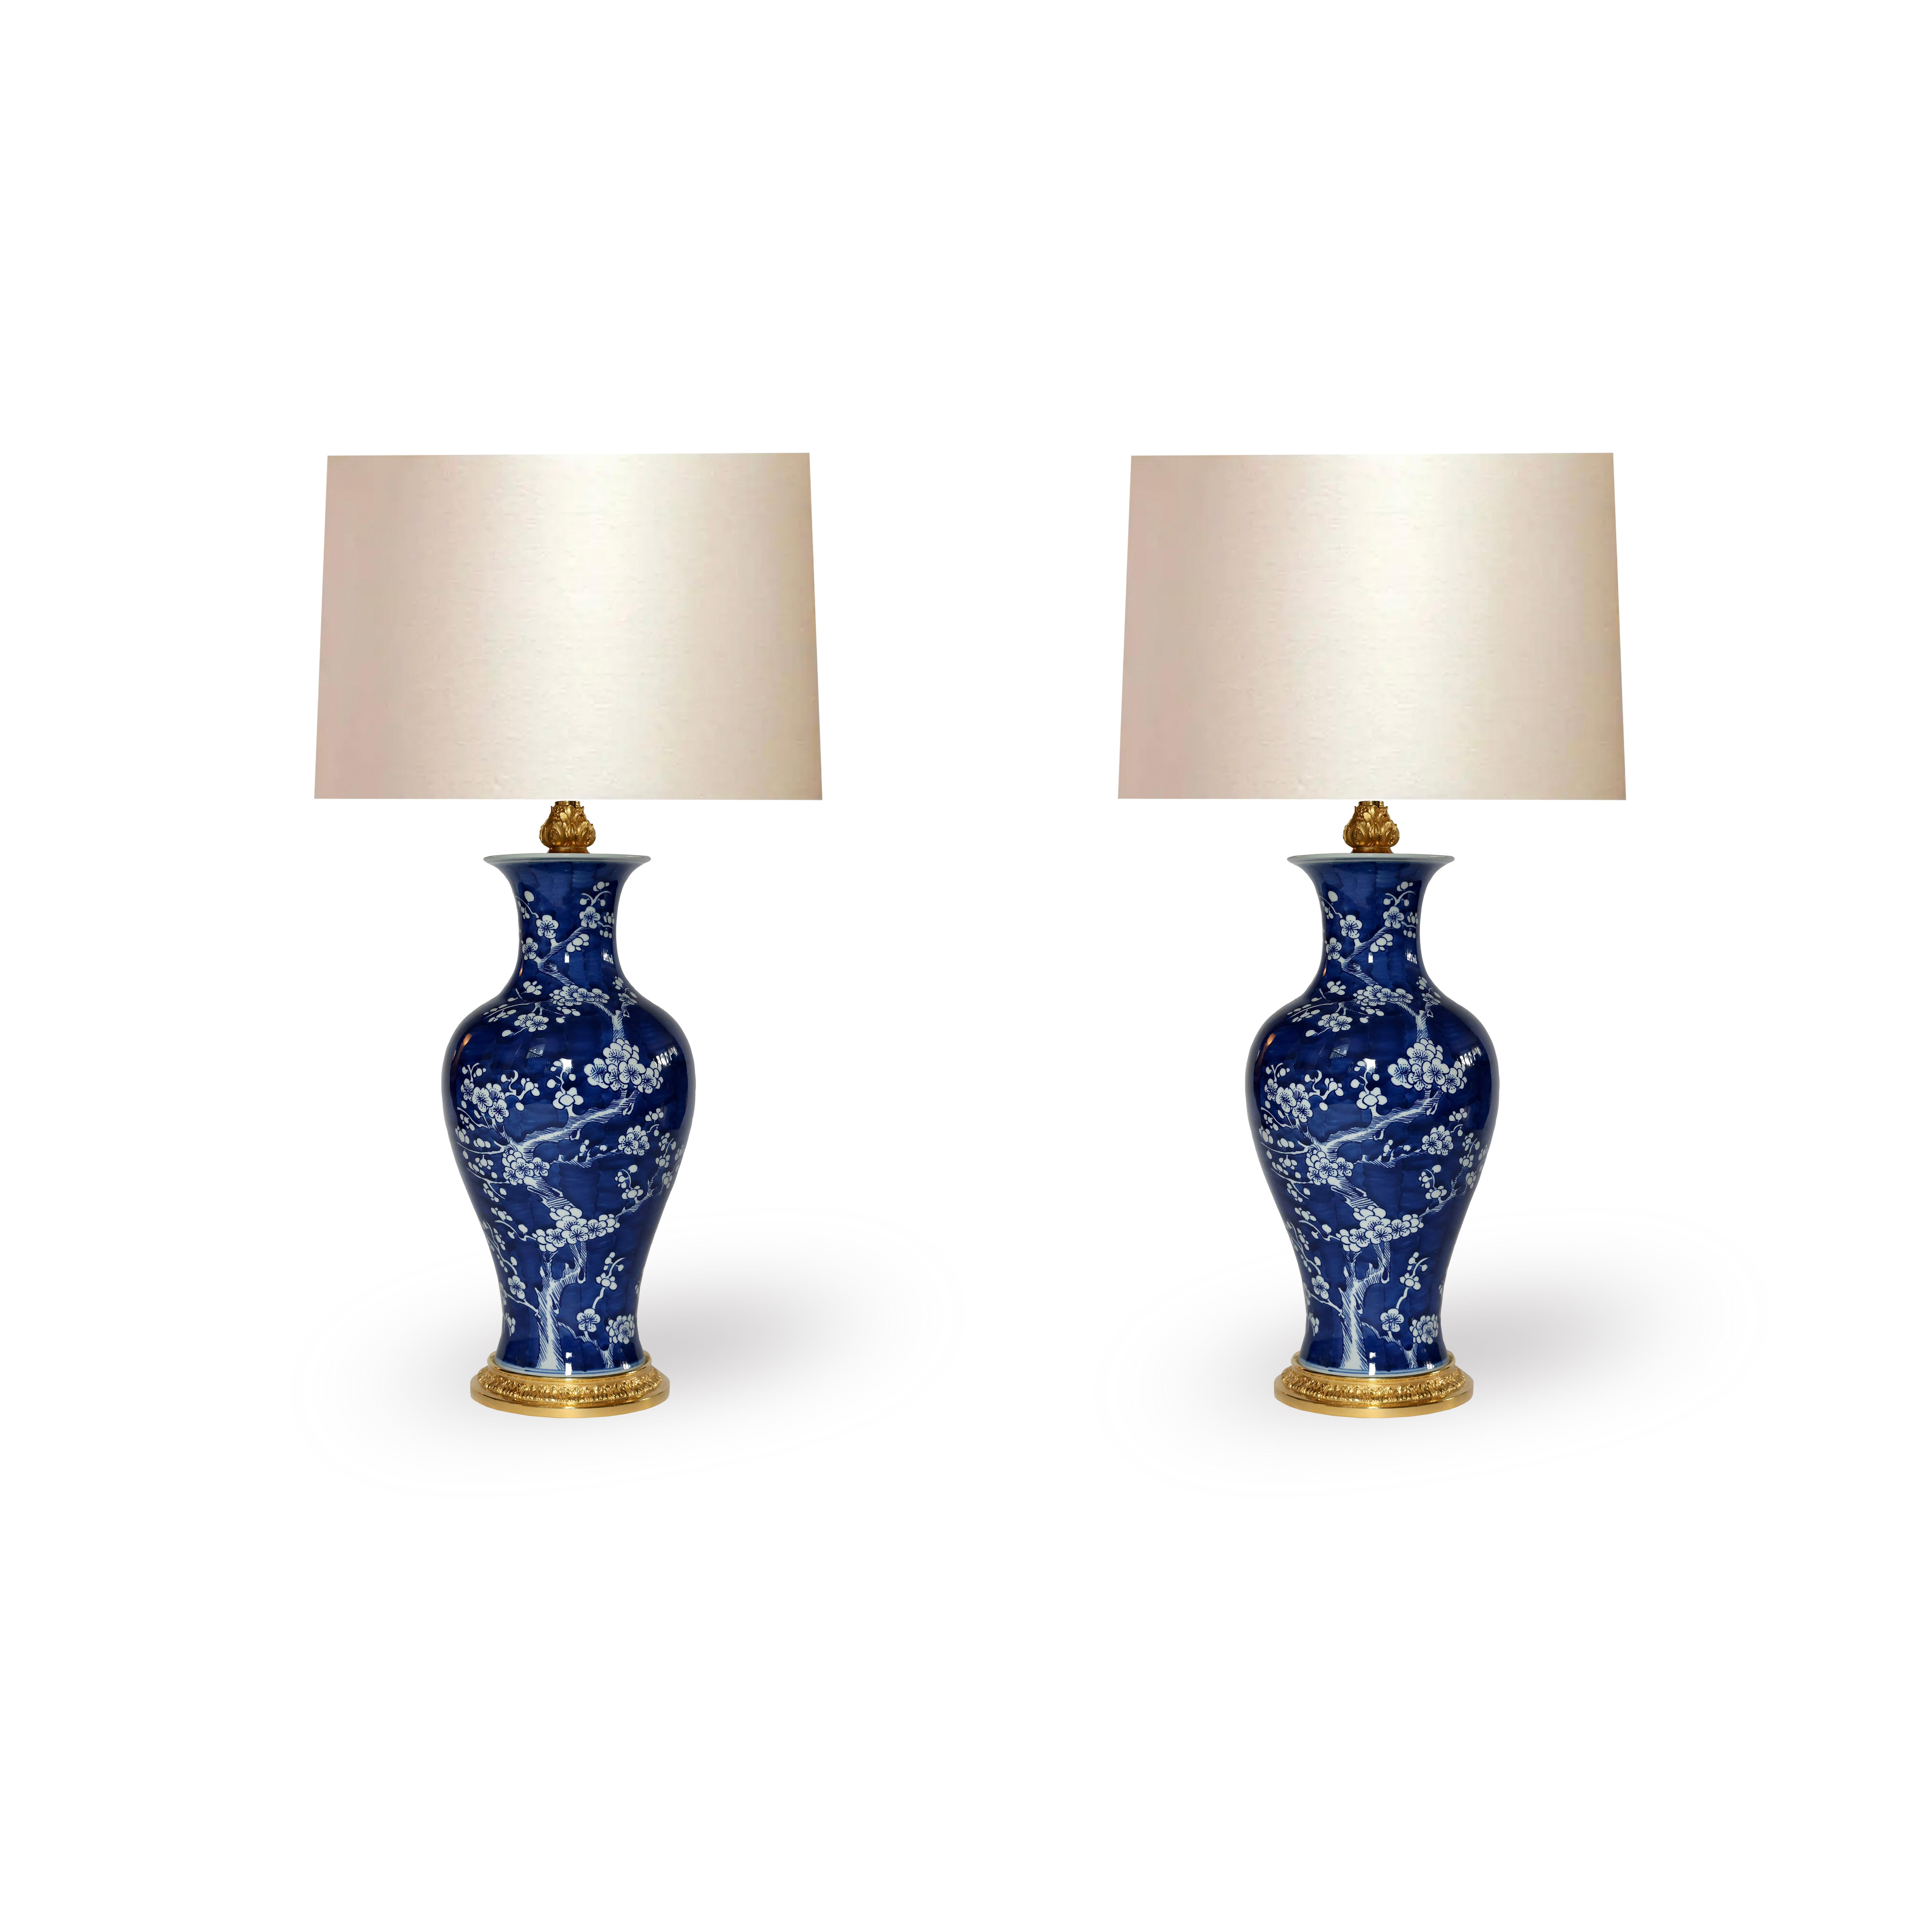 Pair of blue and white porcelain lamps with gilt brass decorations. 
to the top of the porcelain vase 16 inch,
Lampshades are not included